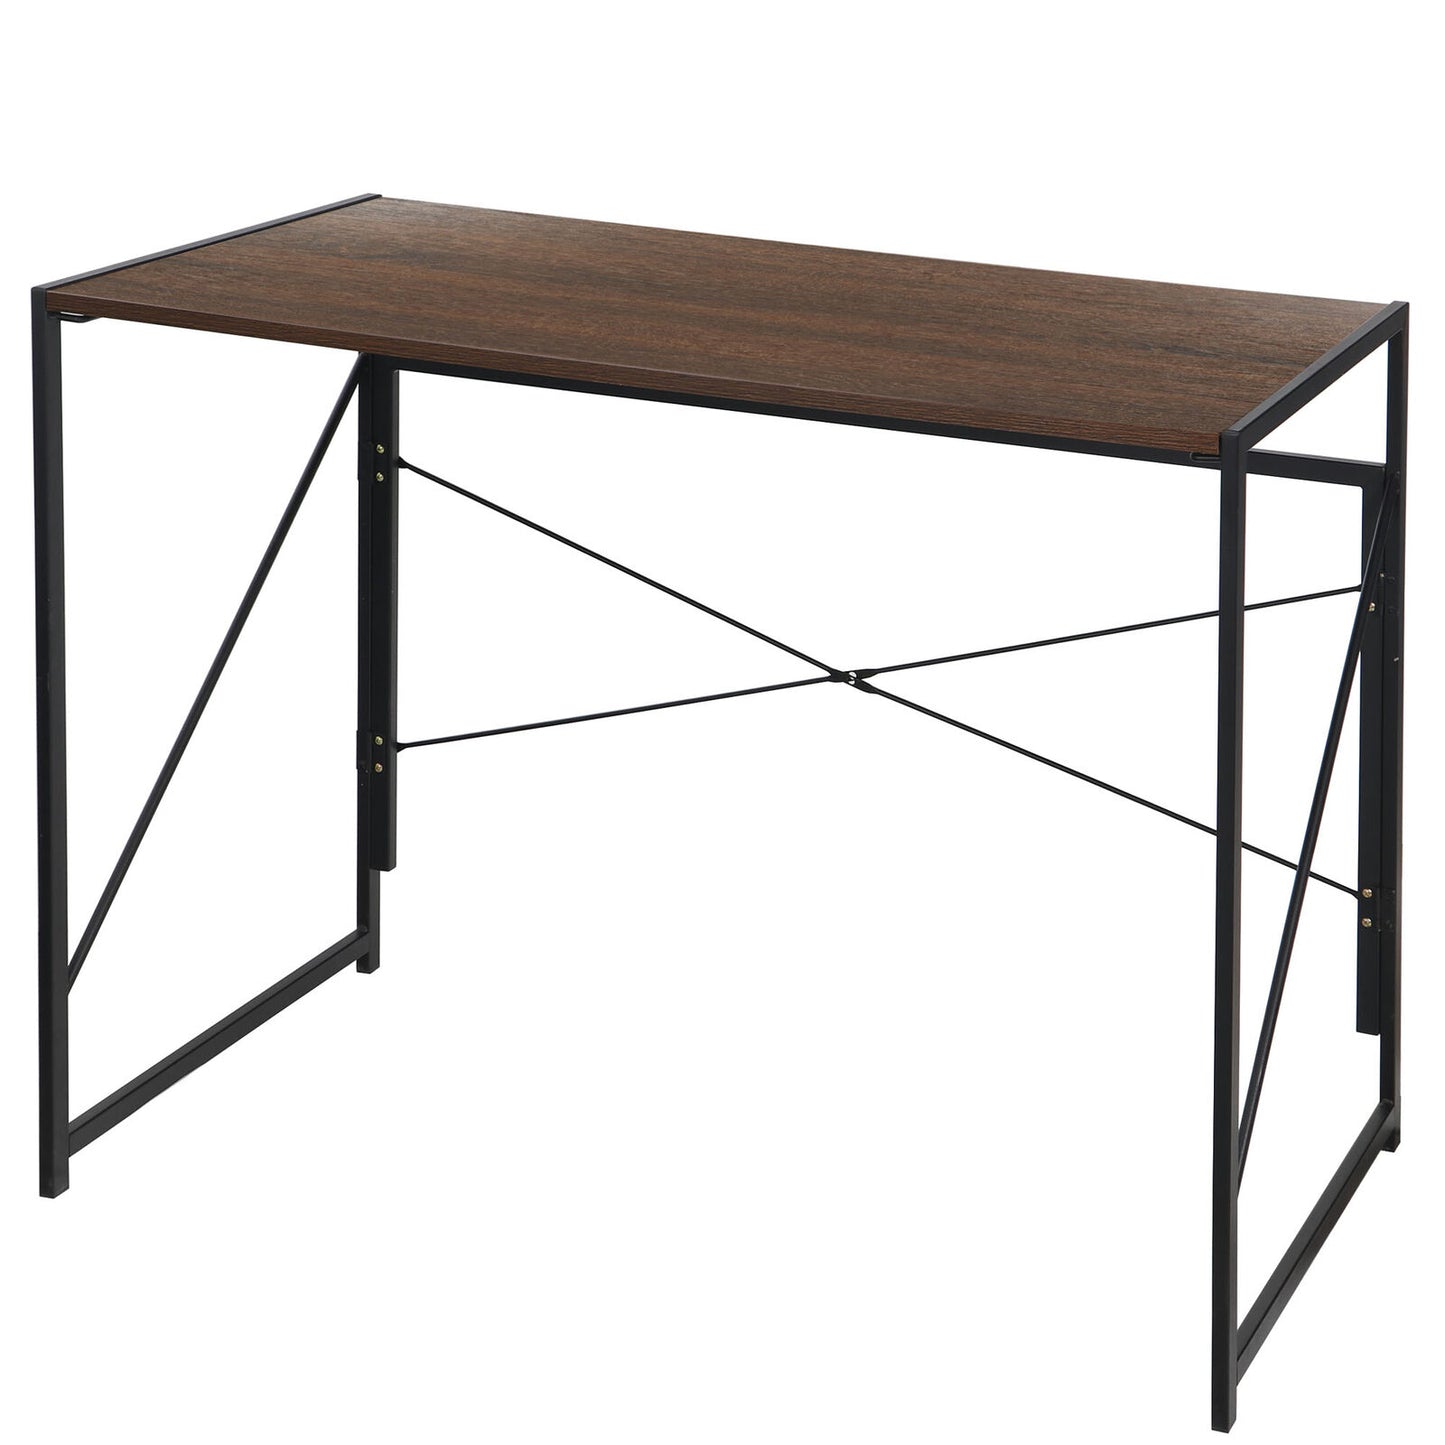 Folding Computer Writing Desk Wood and Metal Frame Study PC Laptop Table Brown